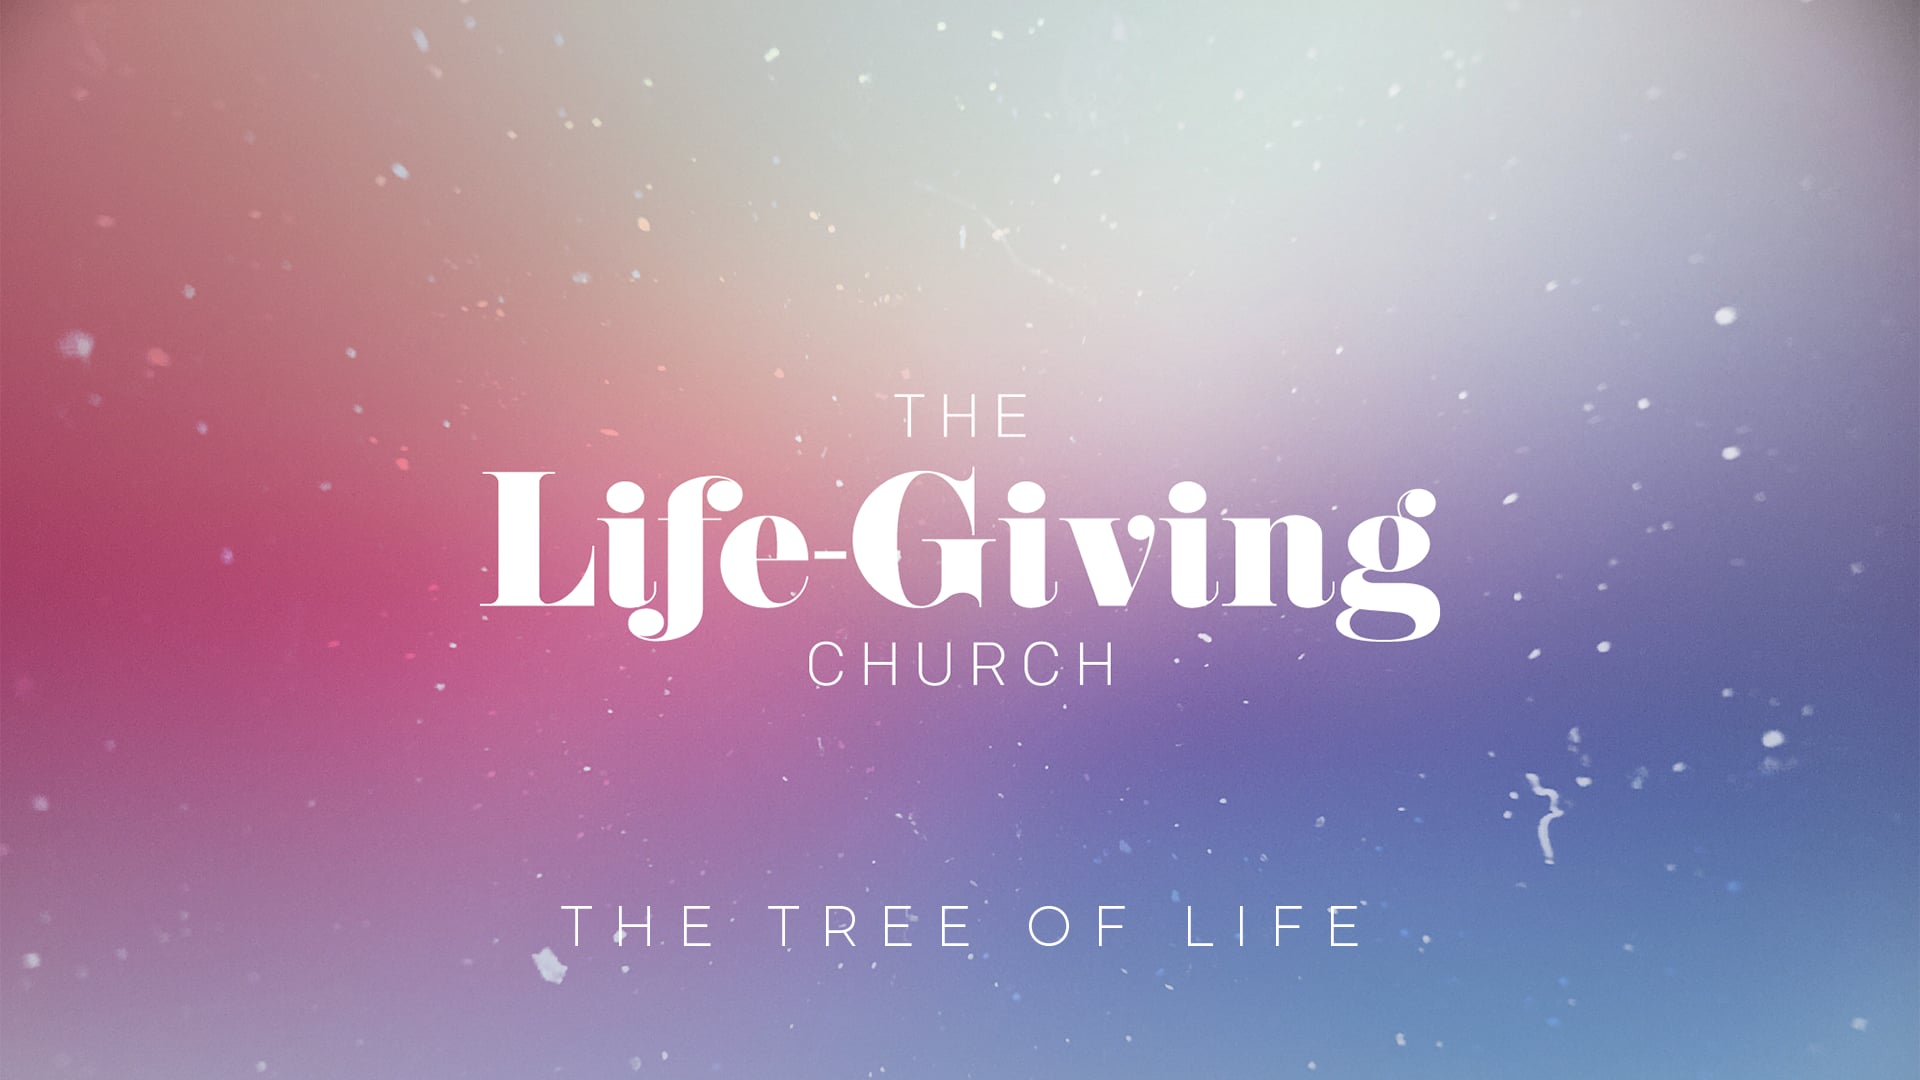 The Life-Giving Church: The Tree of Life